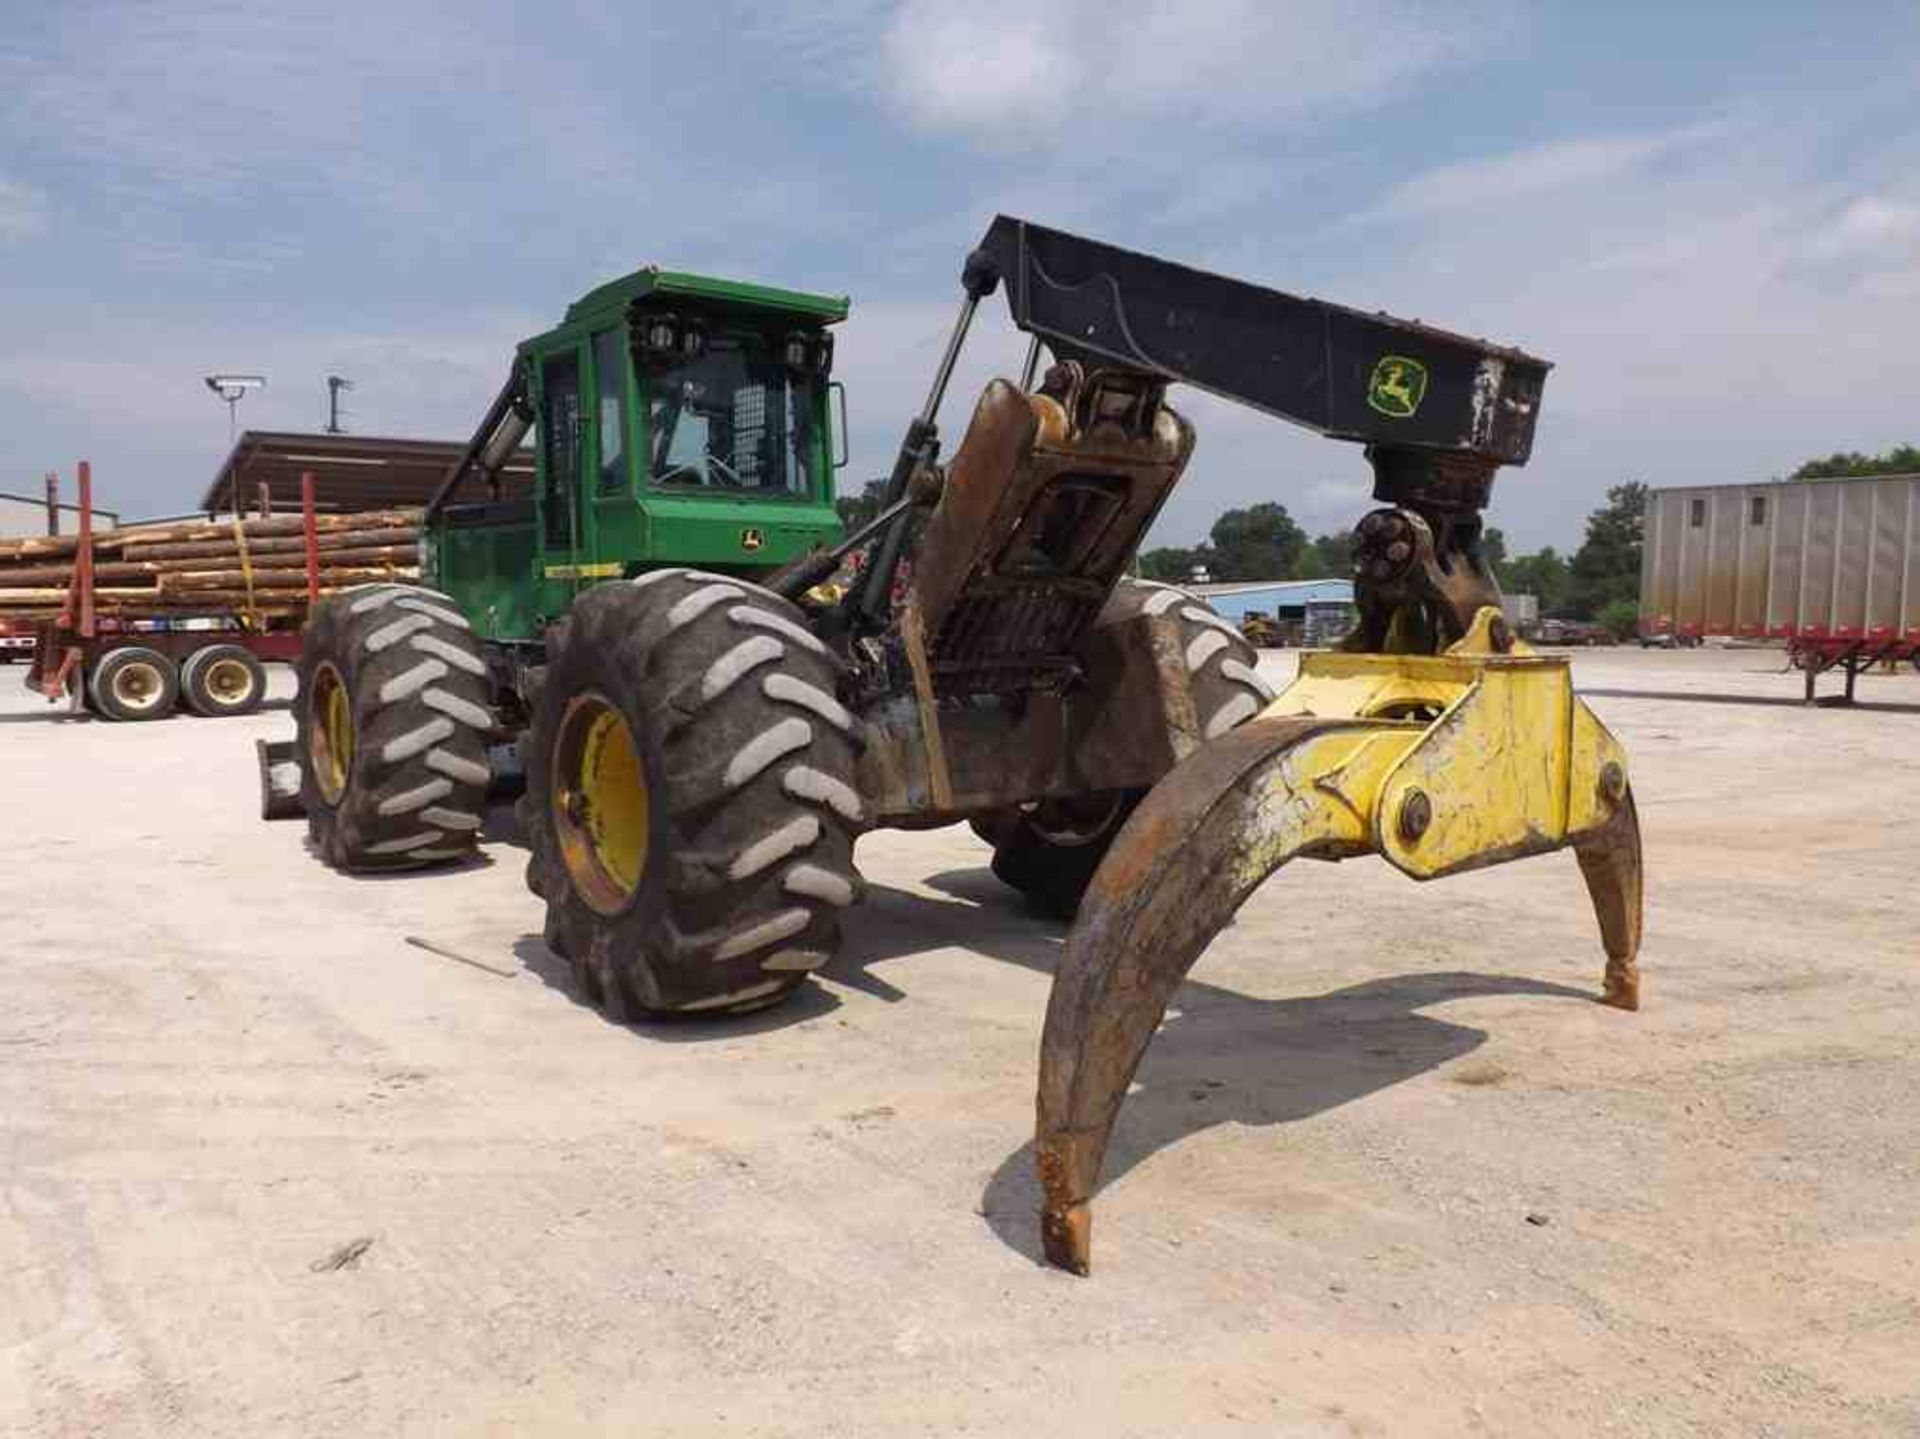 2010 JOHN DEERE 648H DUAL ARCH GRAPPLE SKIDDER W/ENCLOSED CAB WITH HEAT & AIR; W/30.5X32 RUBBER; S/ - Image 5 of 5